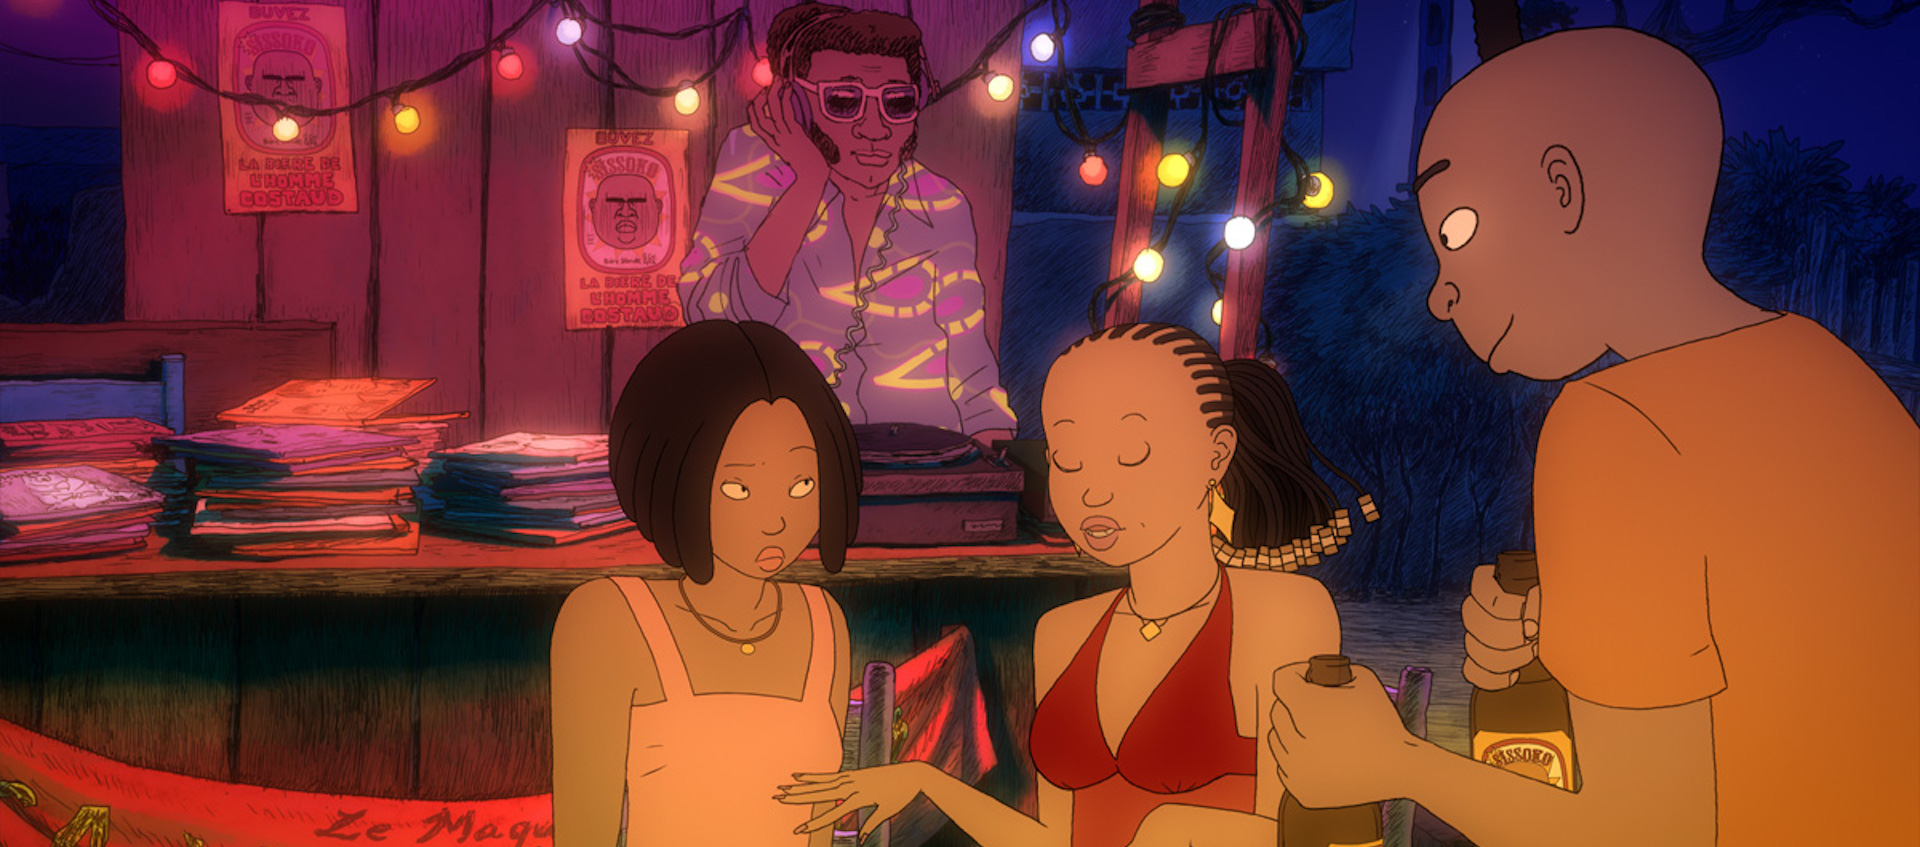 A scene from Marguerite Abouet and Clément Oubrerie's French animated film Aya of Yop City